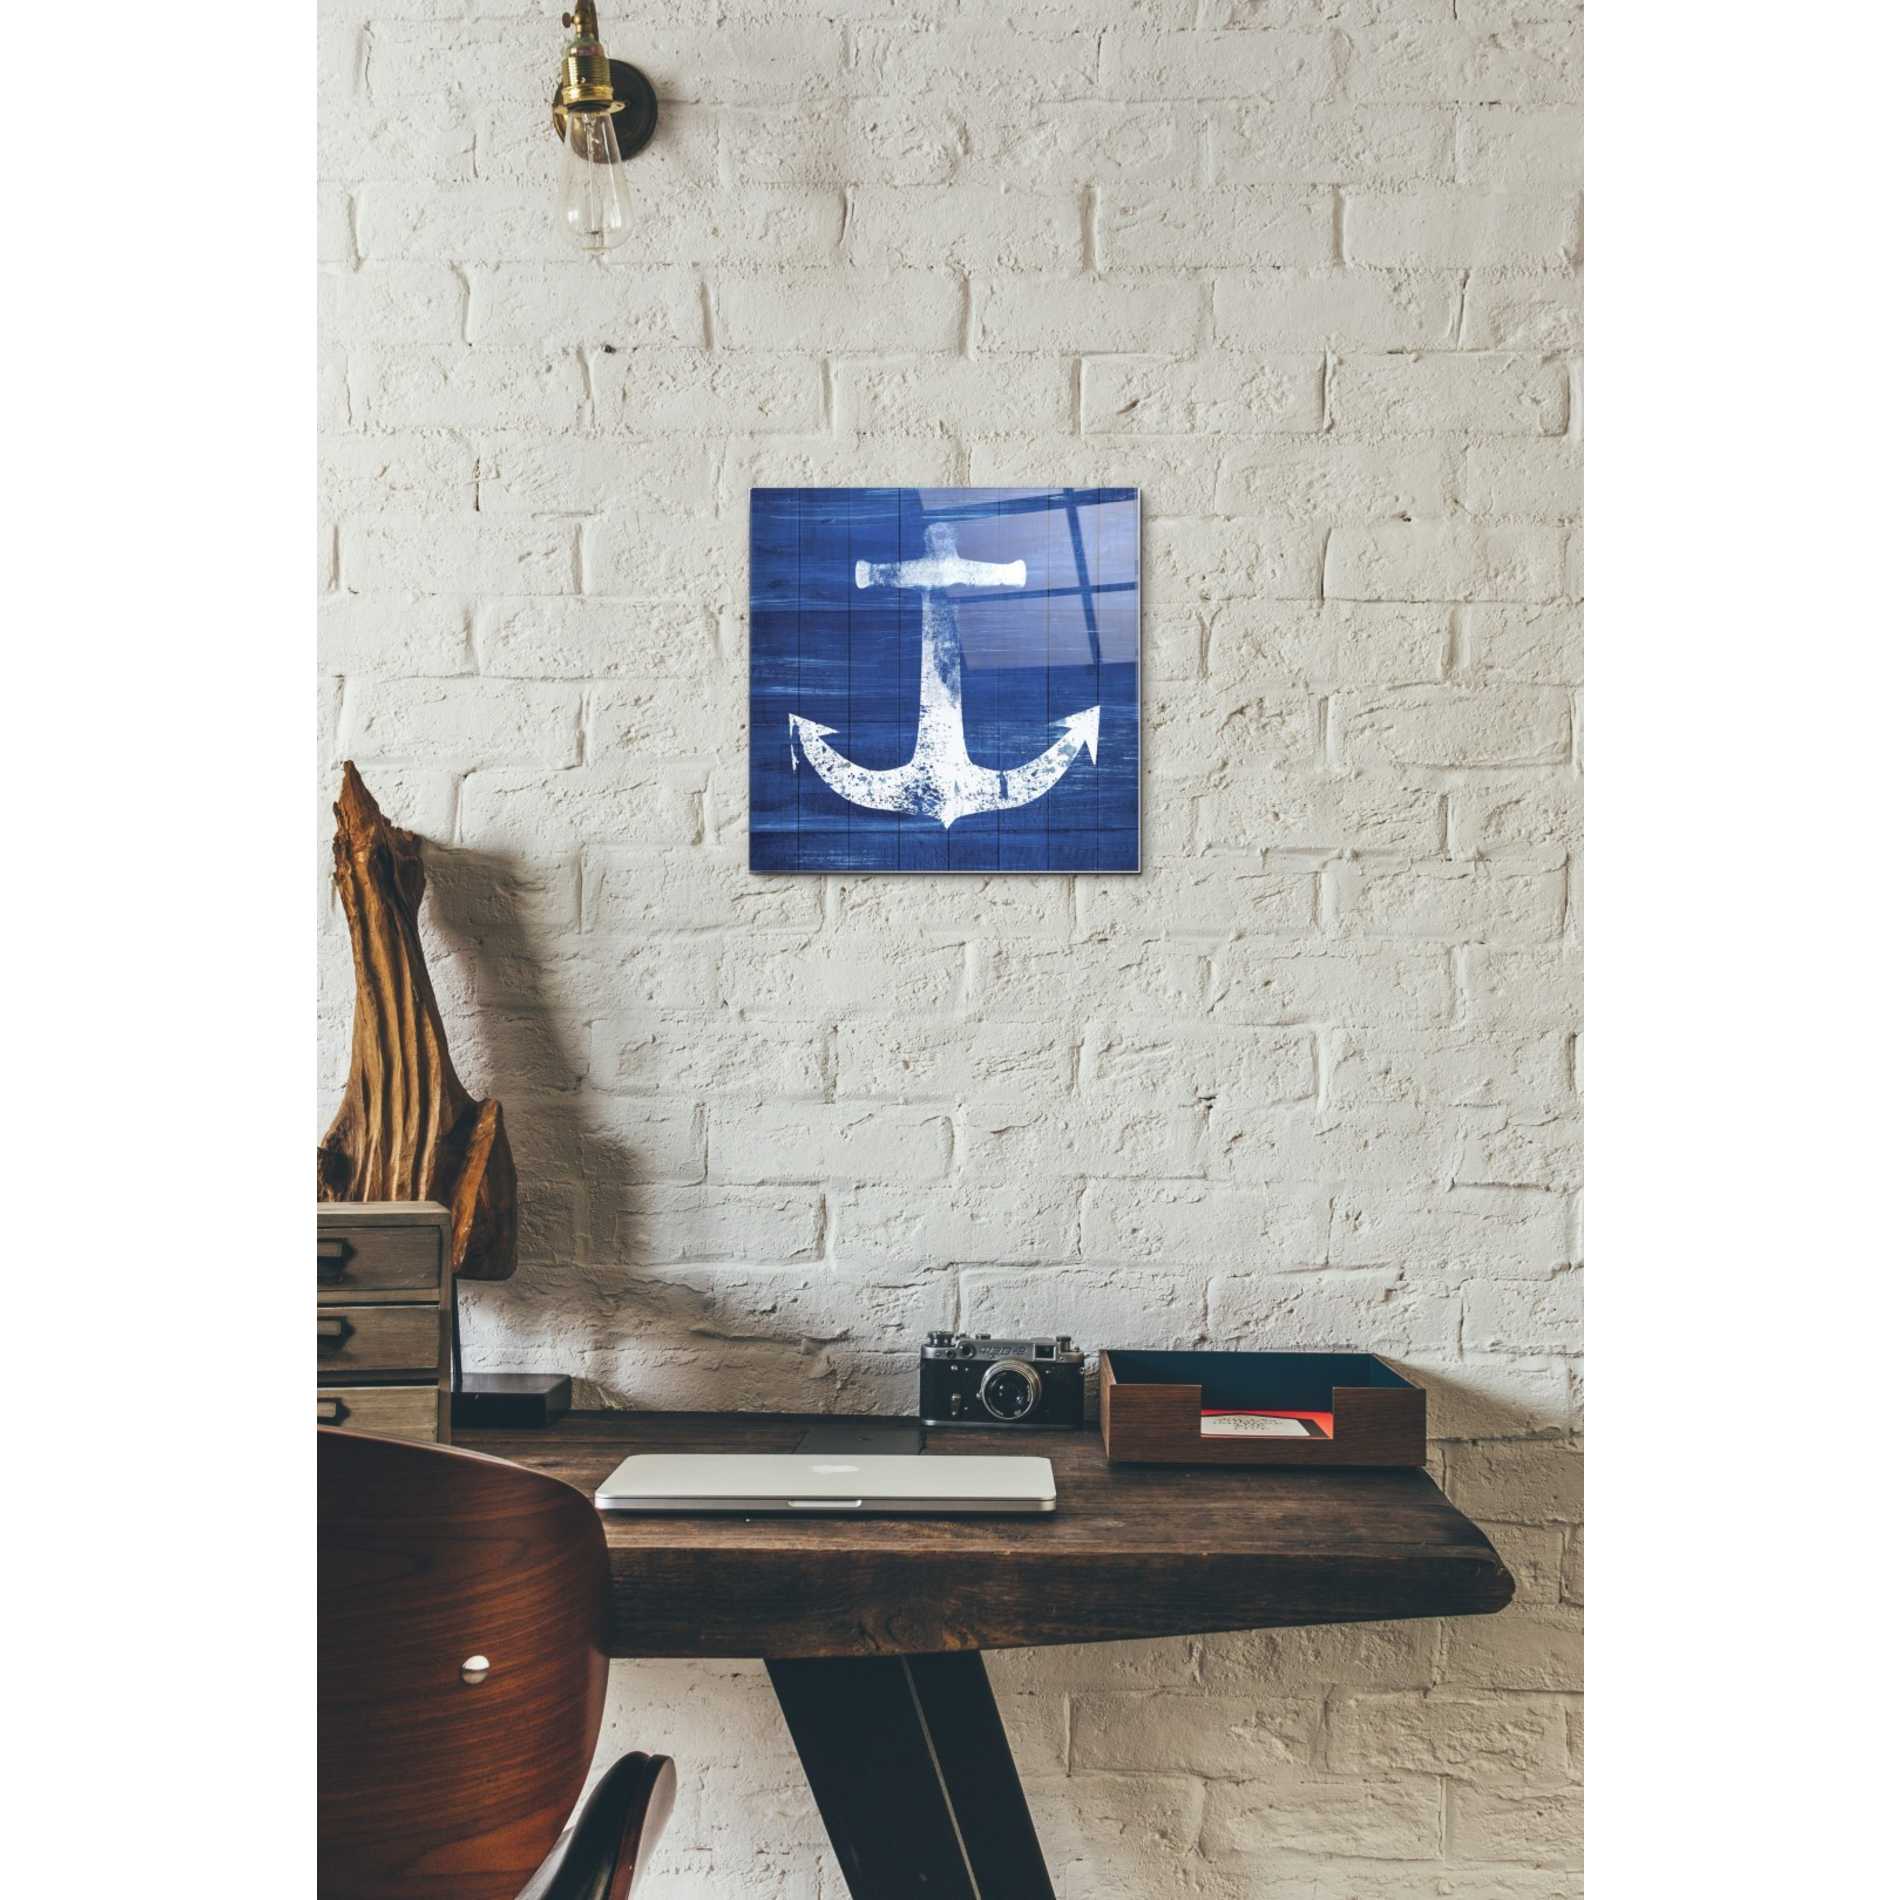 Epic Art 'Blue and White Anchor' by Linda Woods, Acrylic Glass Wall Art,12 x 12